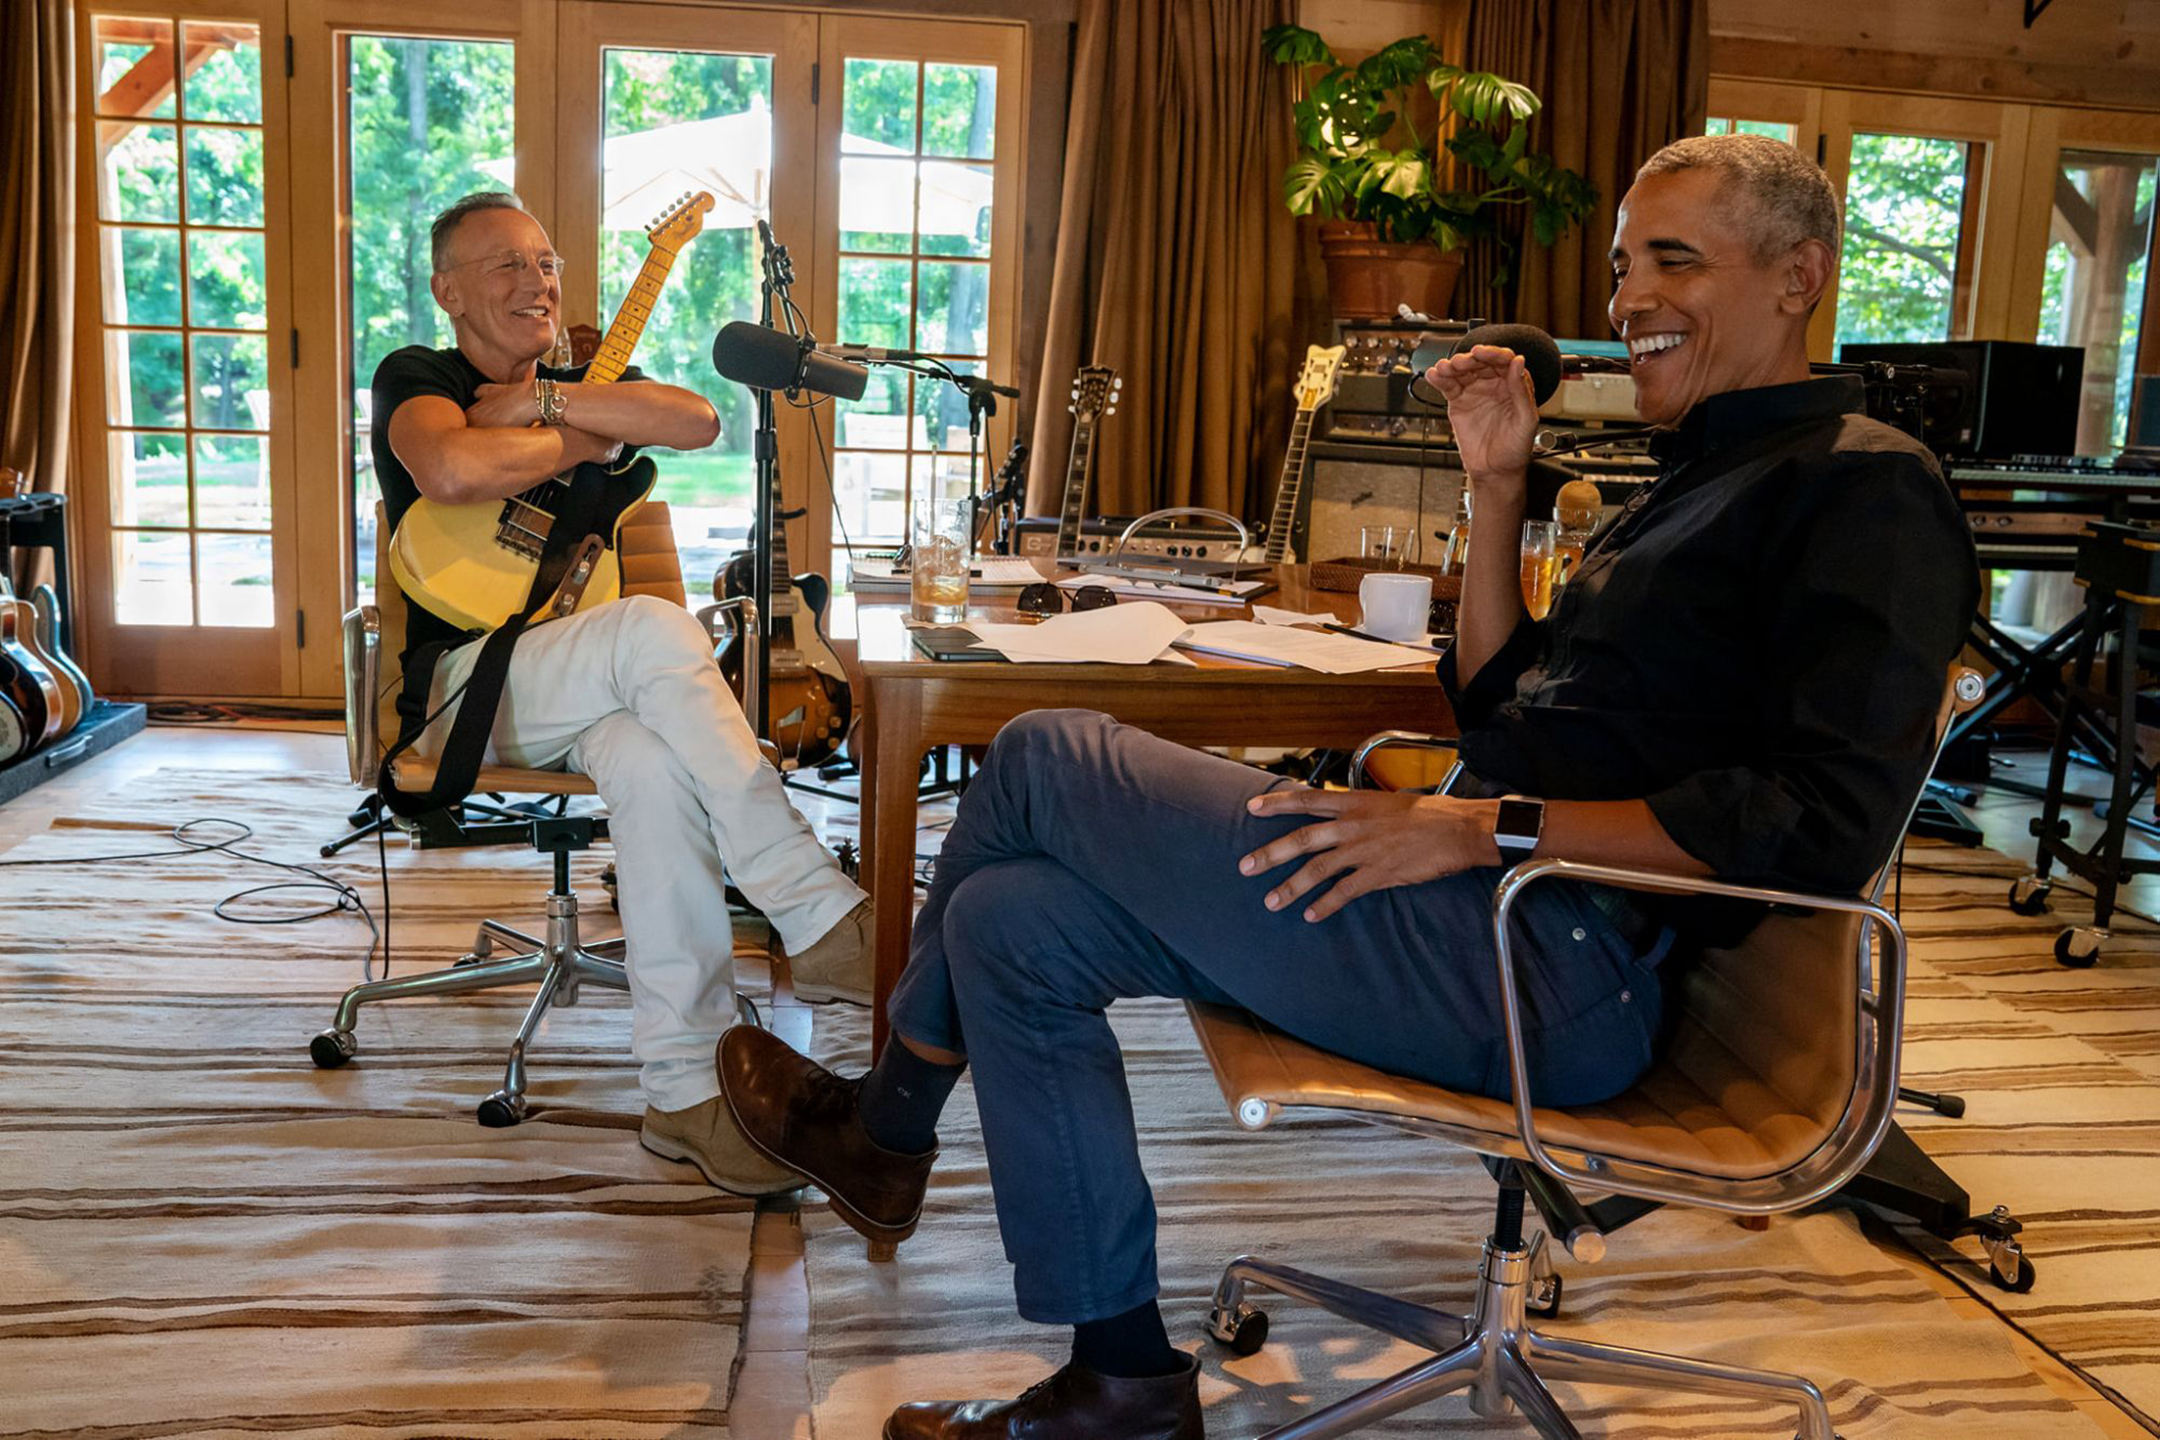 Bruce Springsteen, on the left, smiles while holding a guitar, and on the right Barack Obama laughs during a recording of their podcast